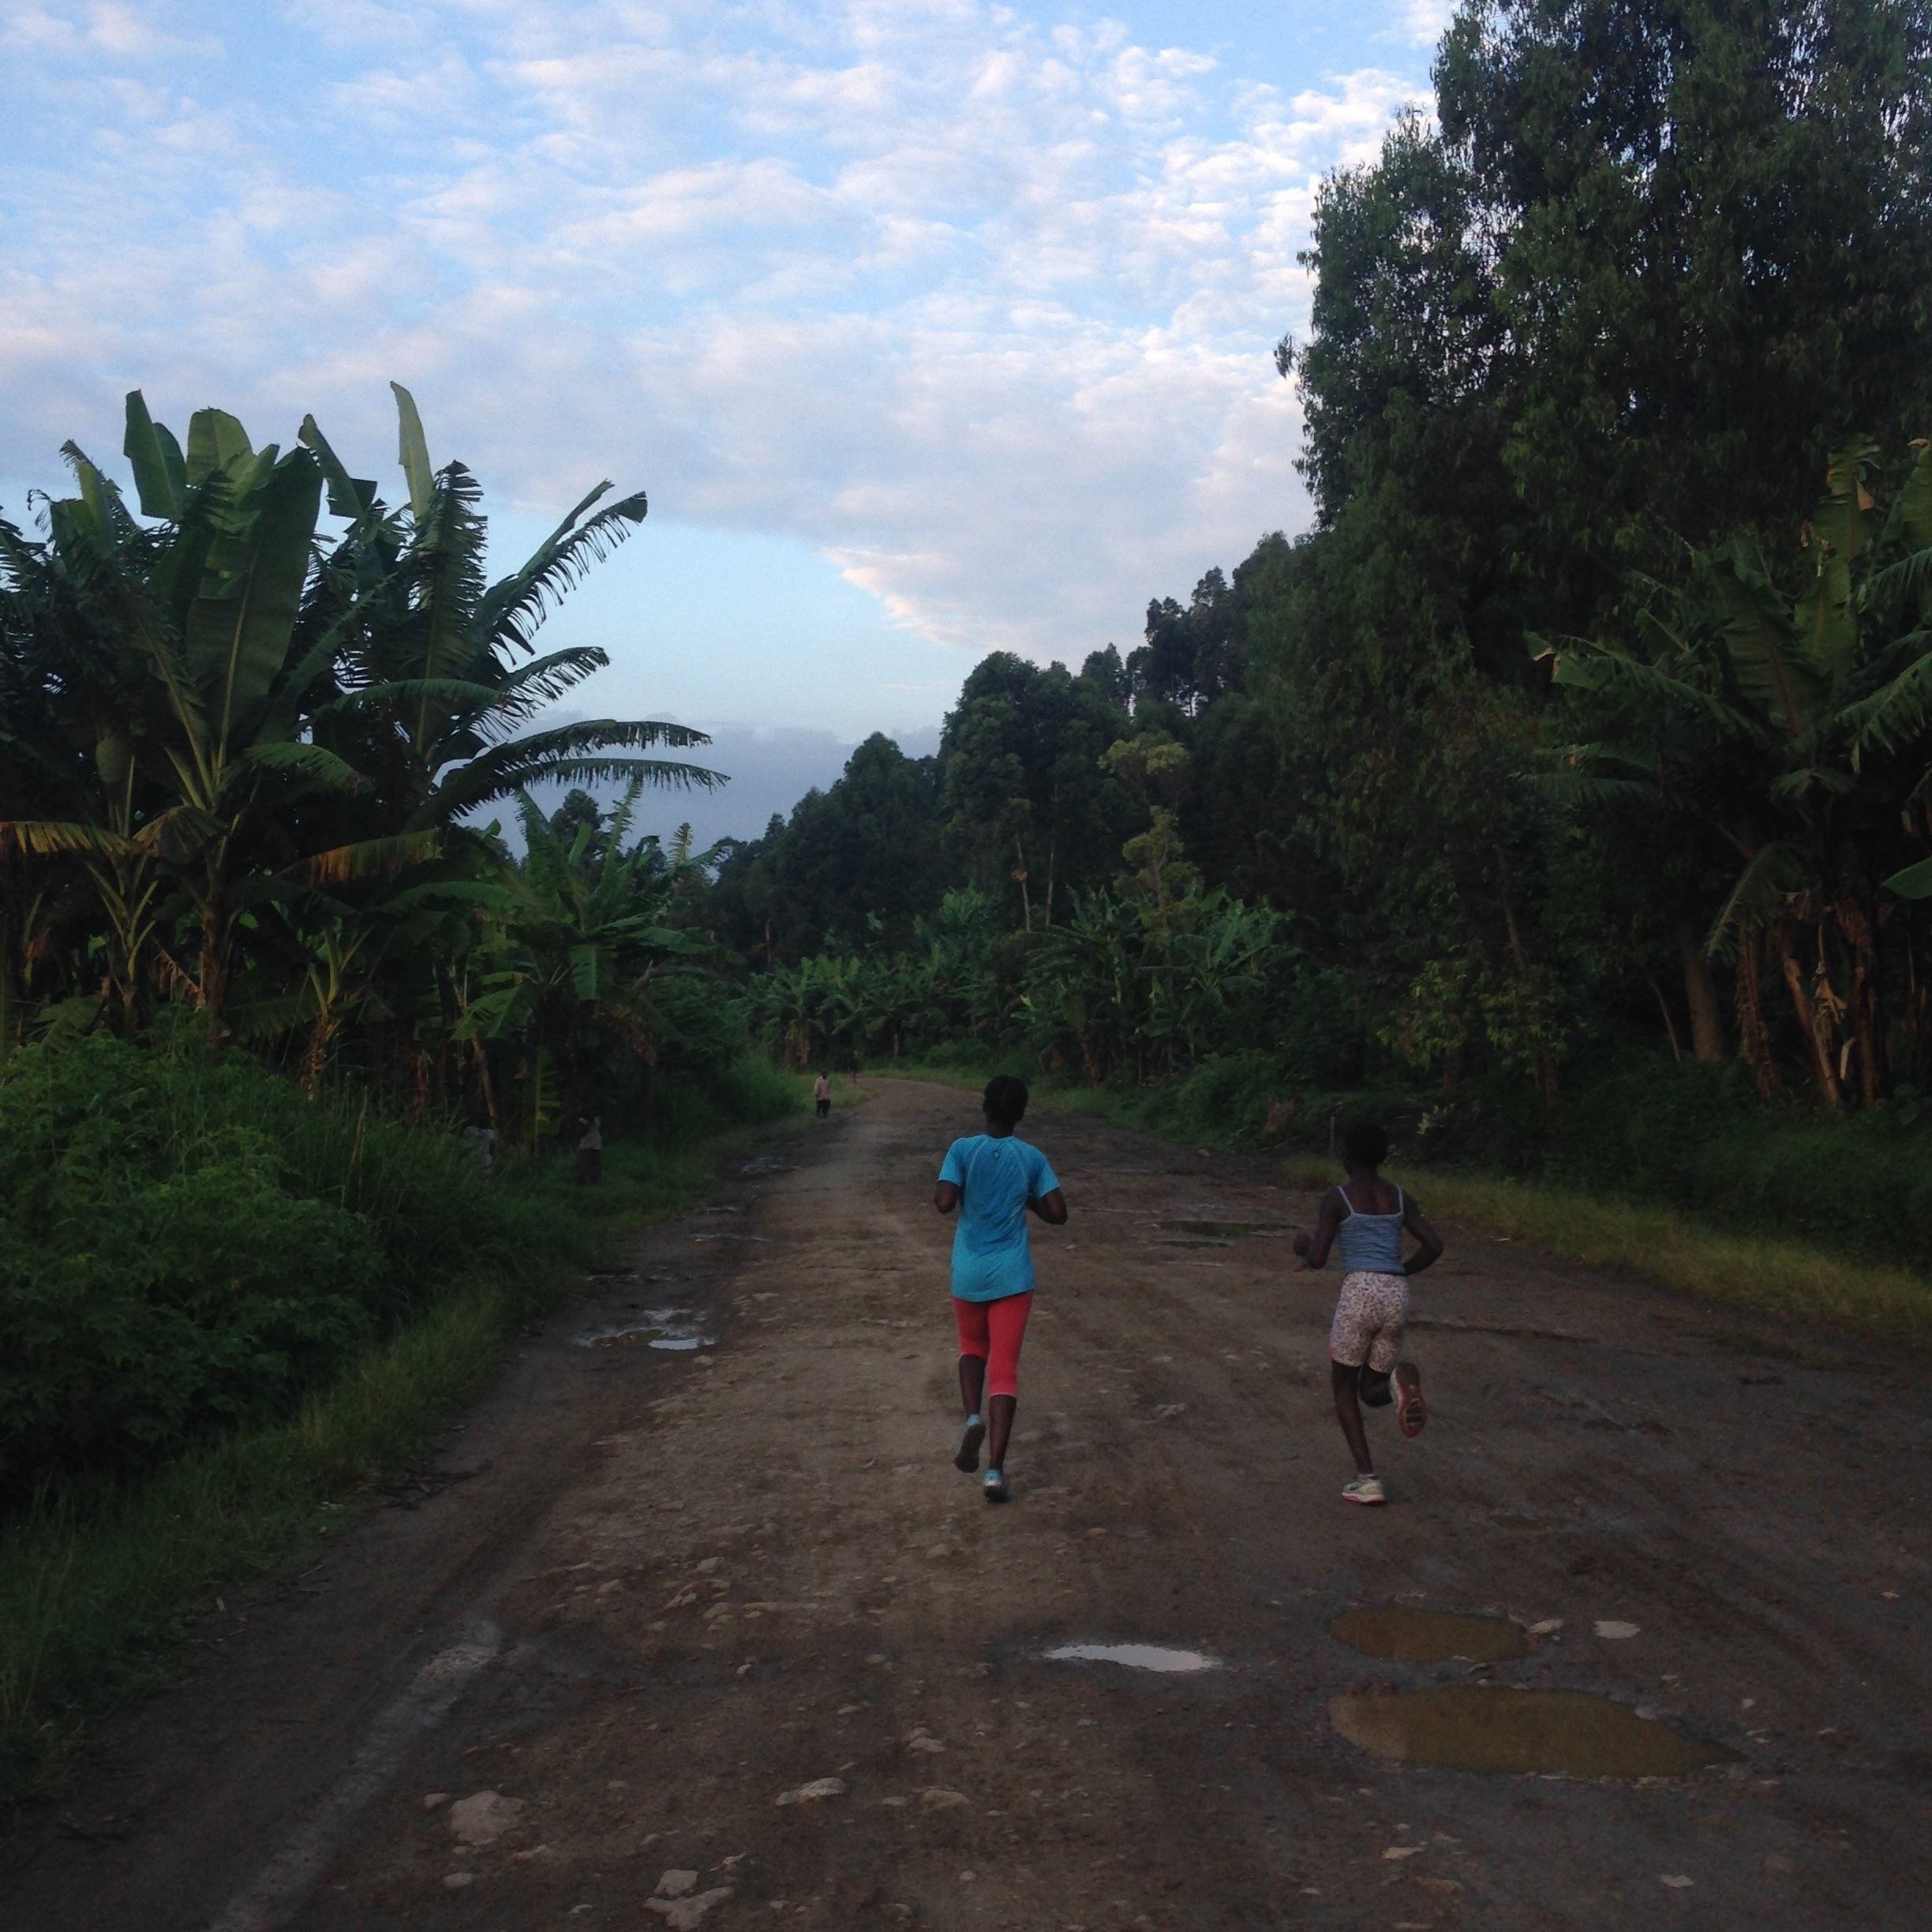 Beatrice [left] and Faraha [right] run down the main road in Kirotshe for morning practice